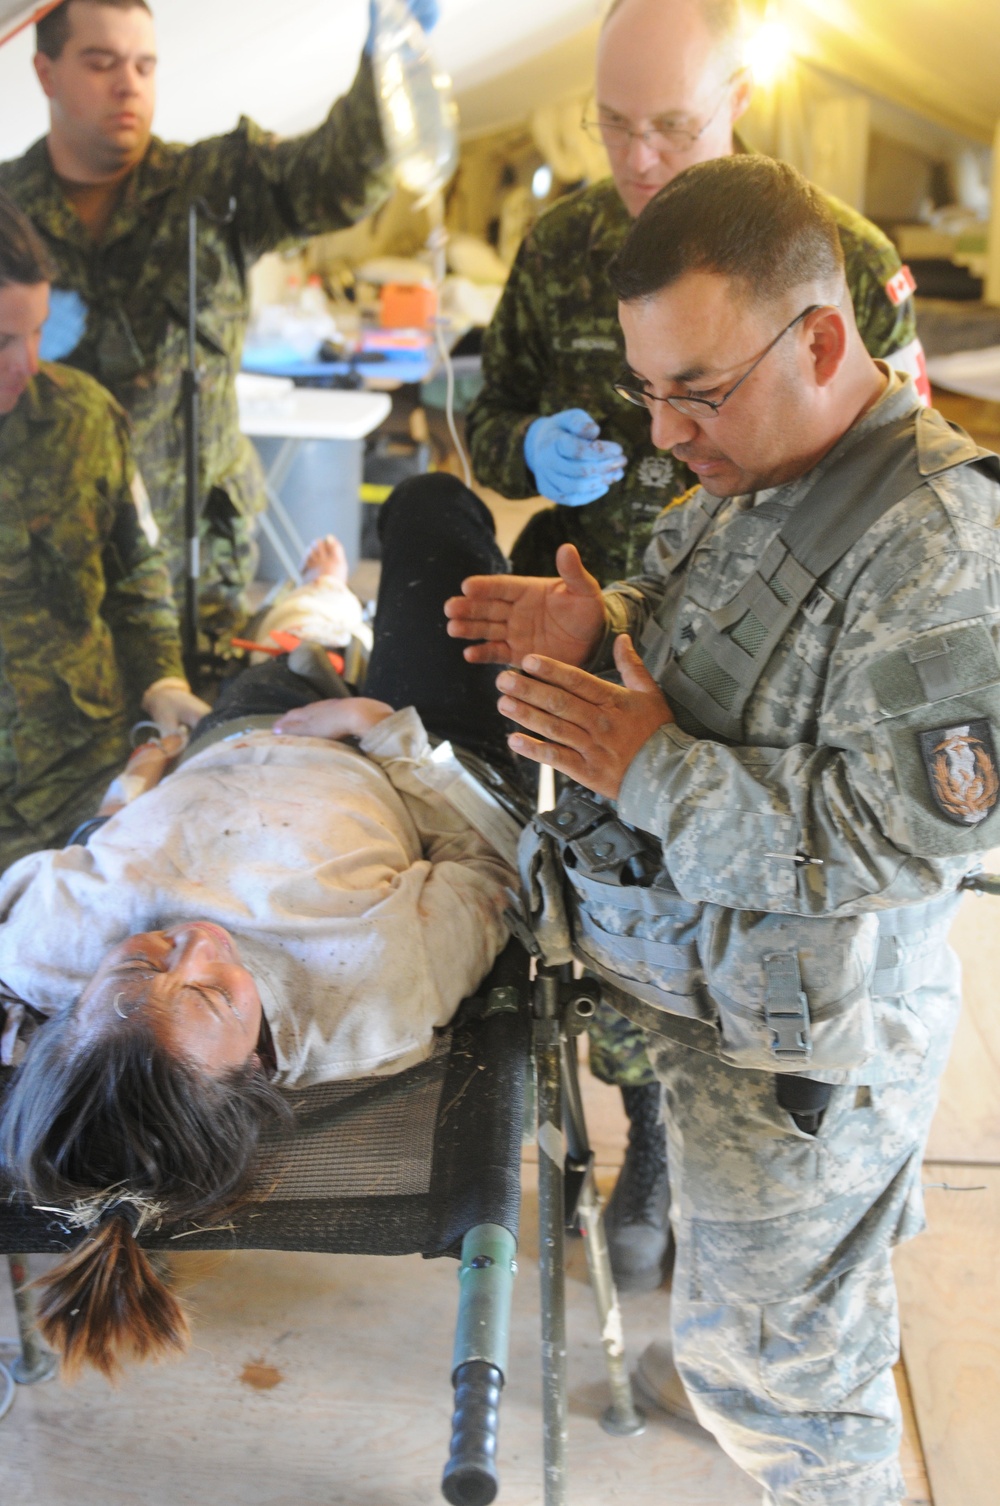 162nd Area Support Medical Company supports Canadian Army in Mass Casualty Drill